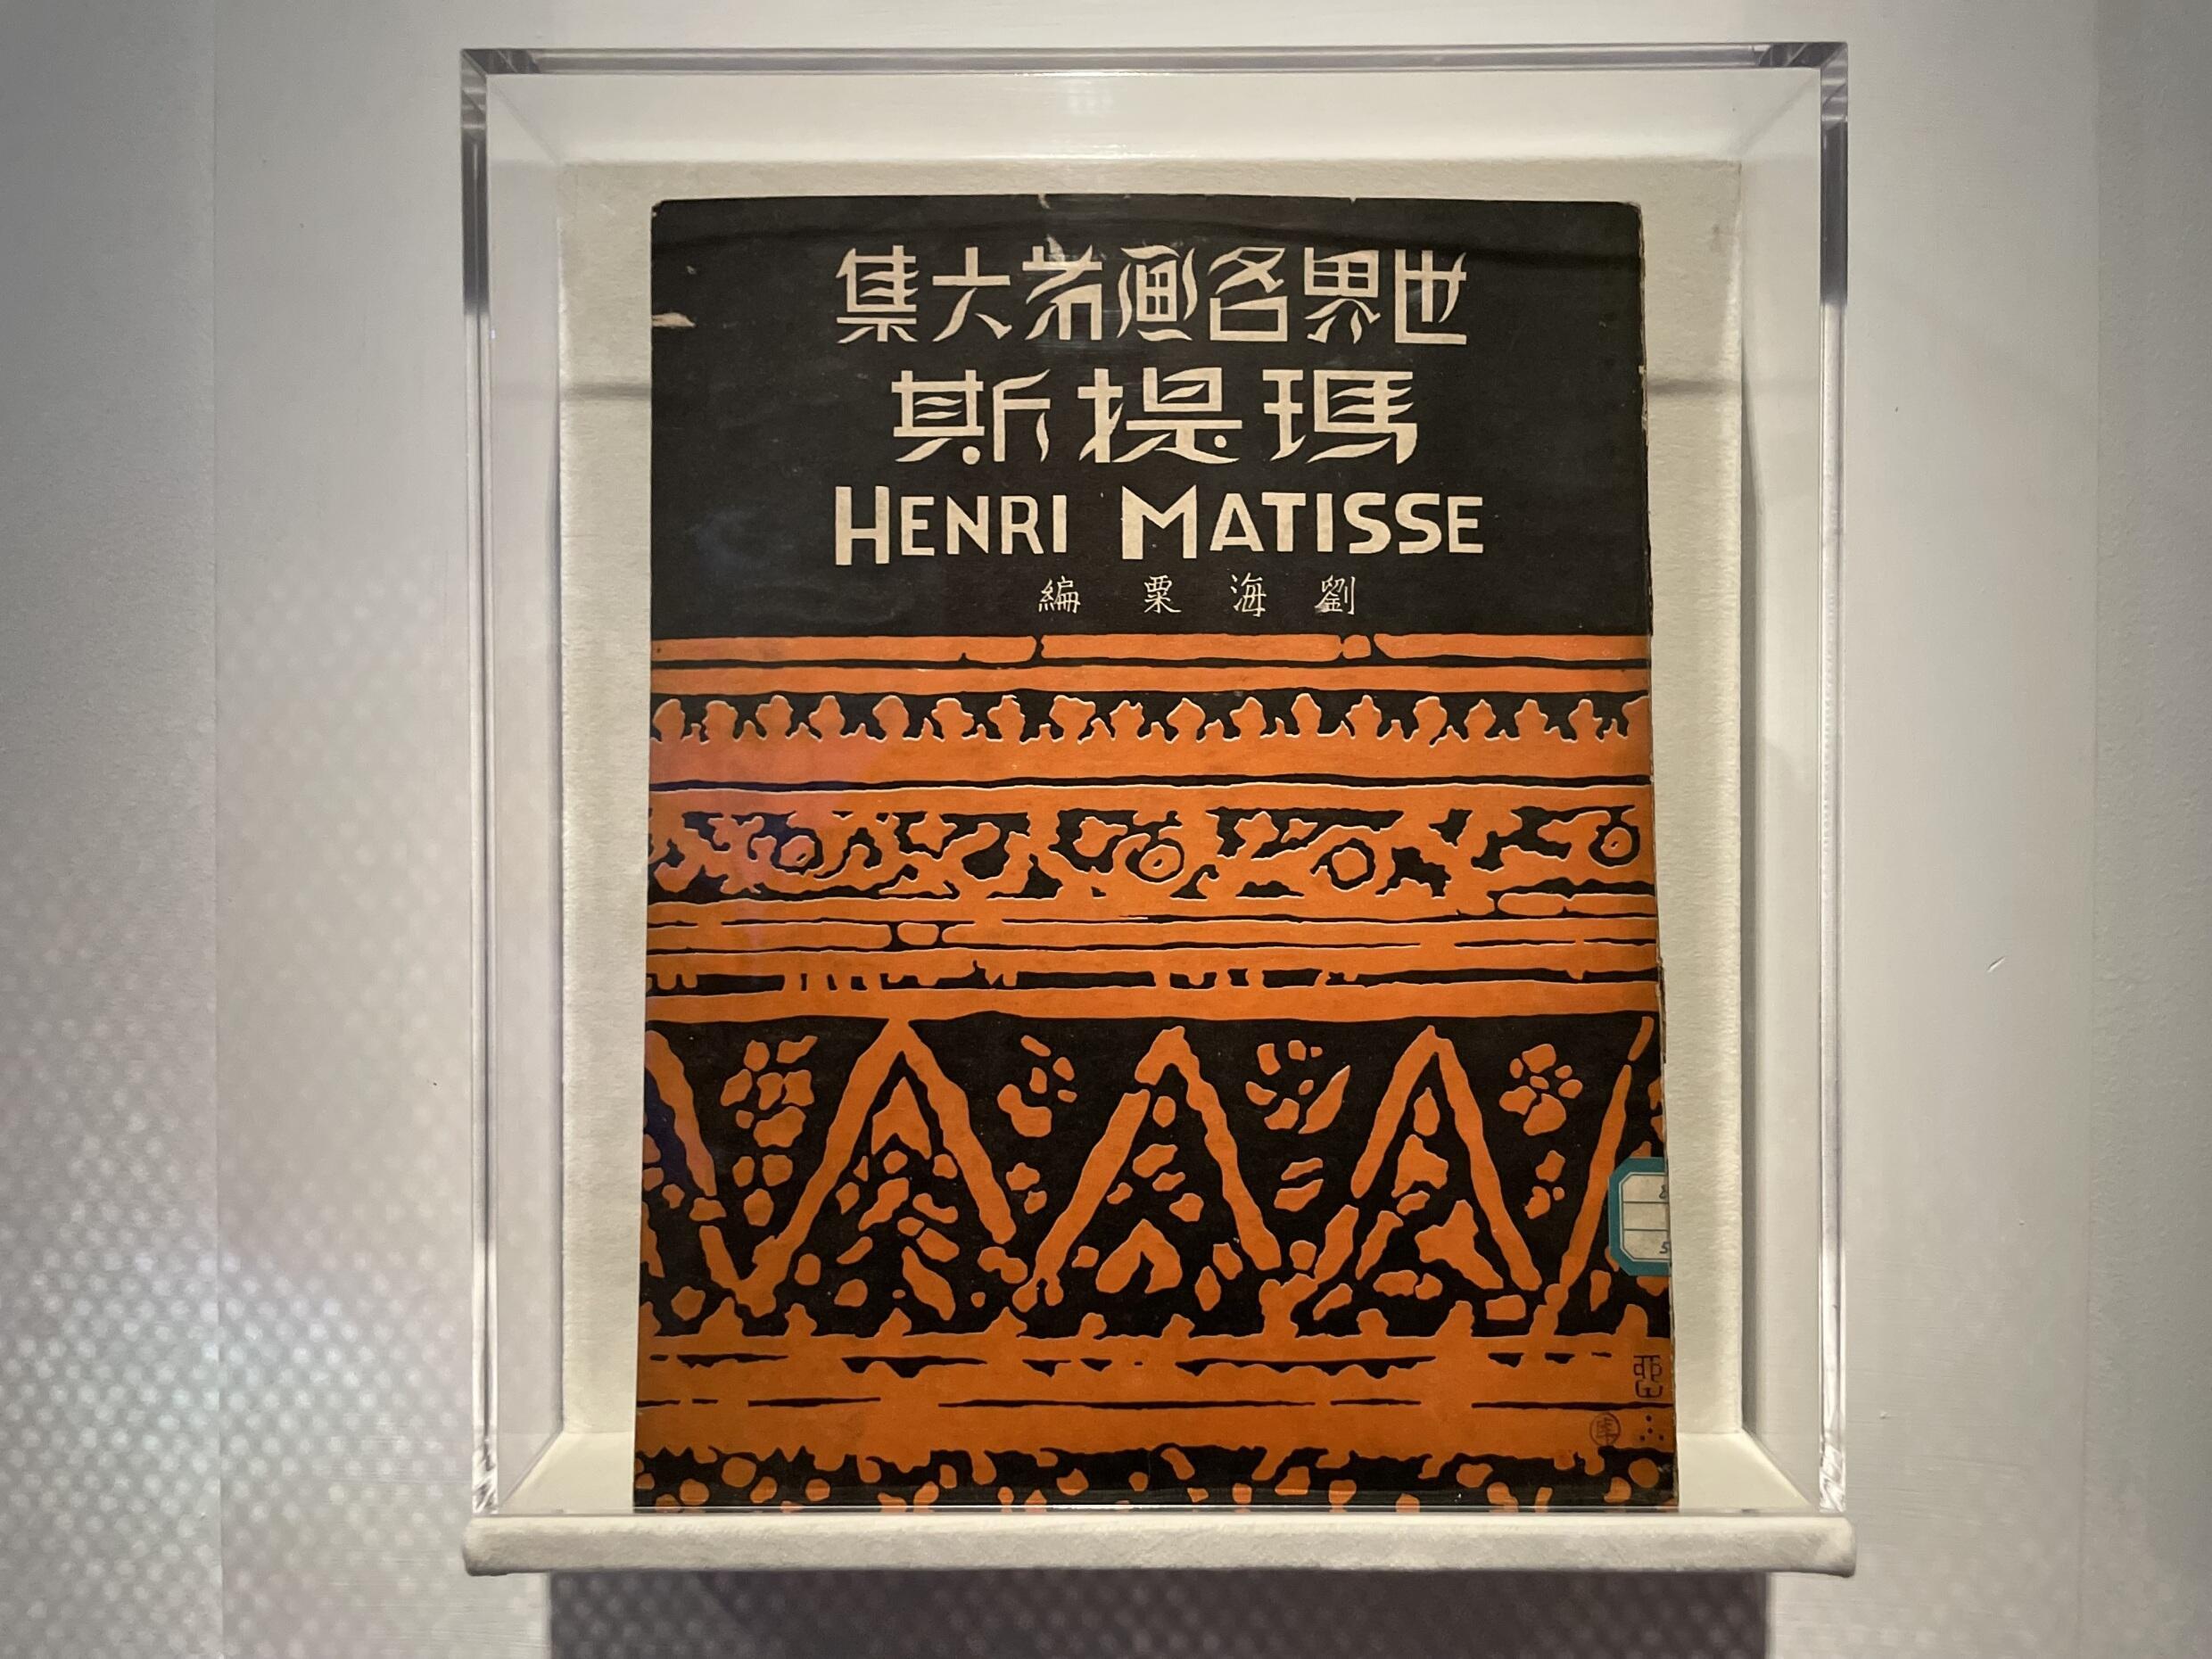 The first publication on Henri Matisse in China dates back to 1920.